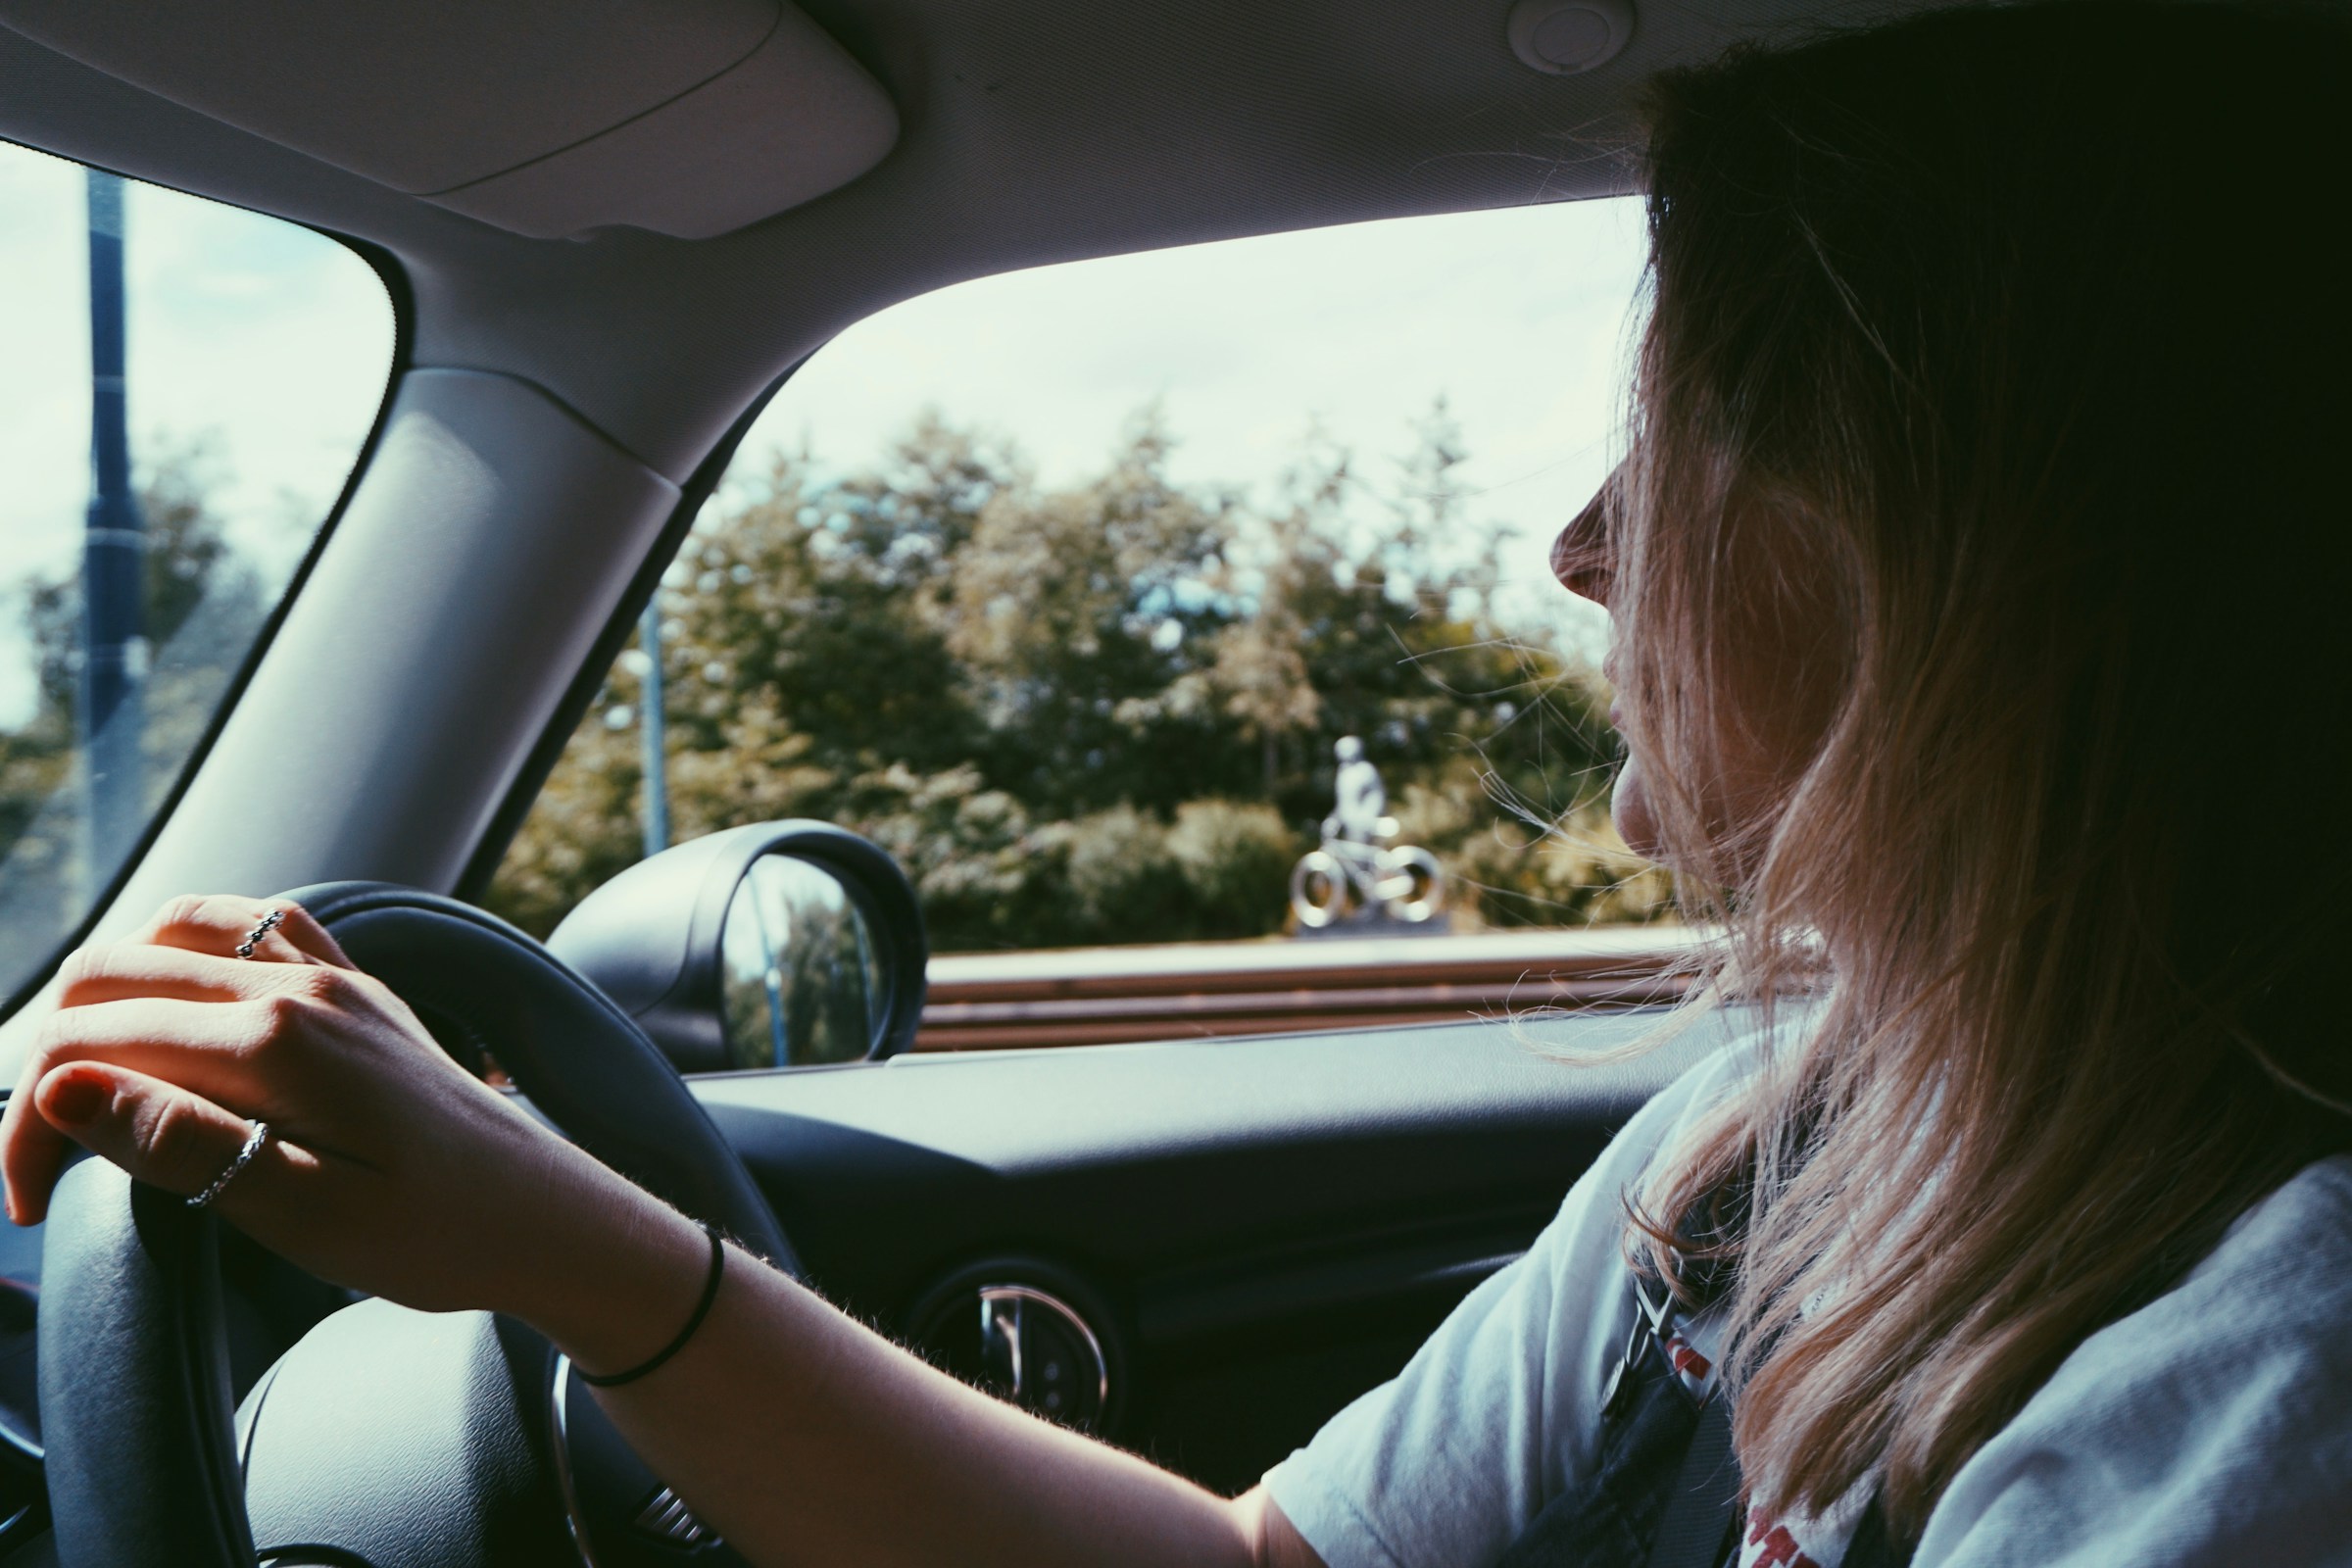 A woman driving her car | Source: Unsplash